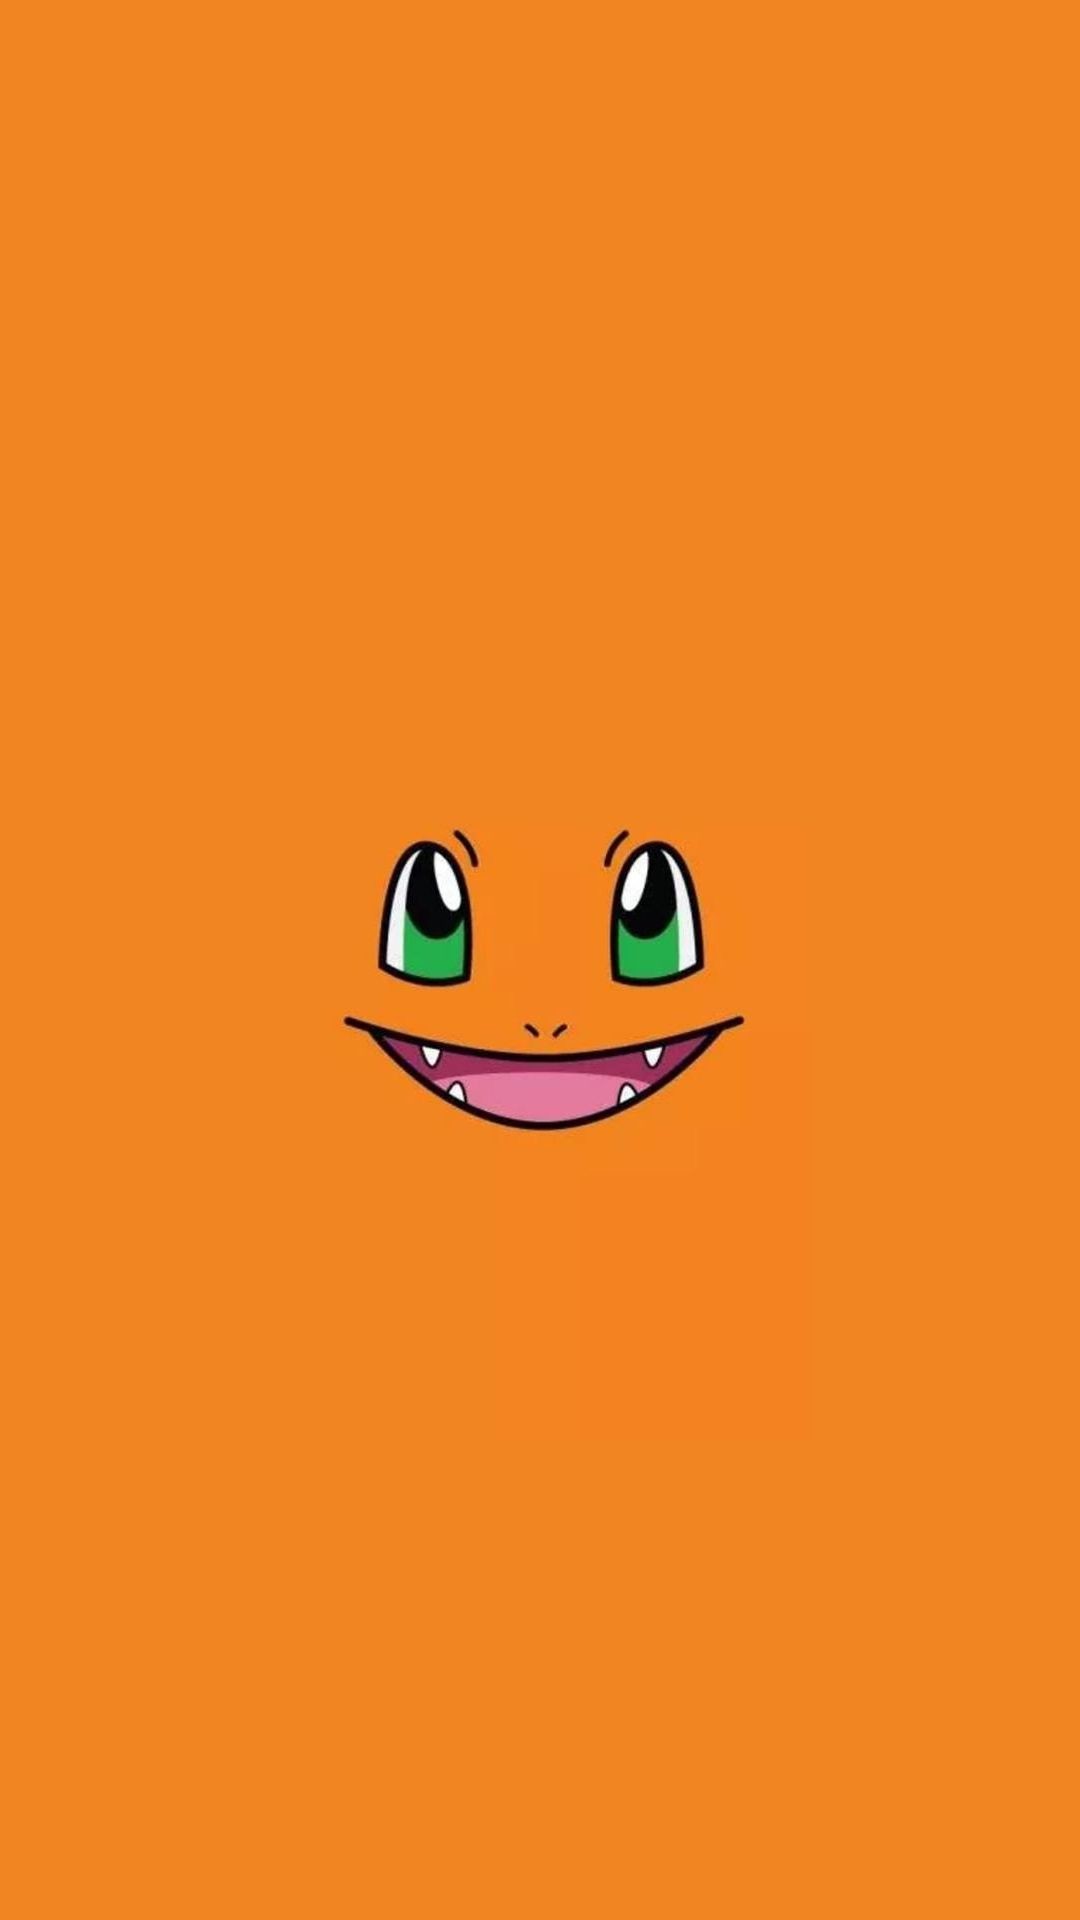 1080x1920 Charmander Pokemon Android wallpaper - Android HD wallpapers